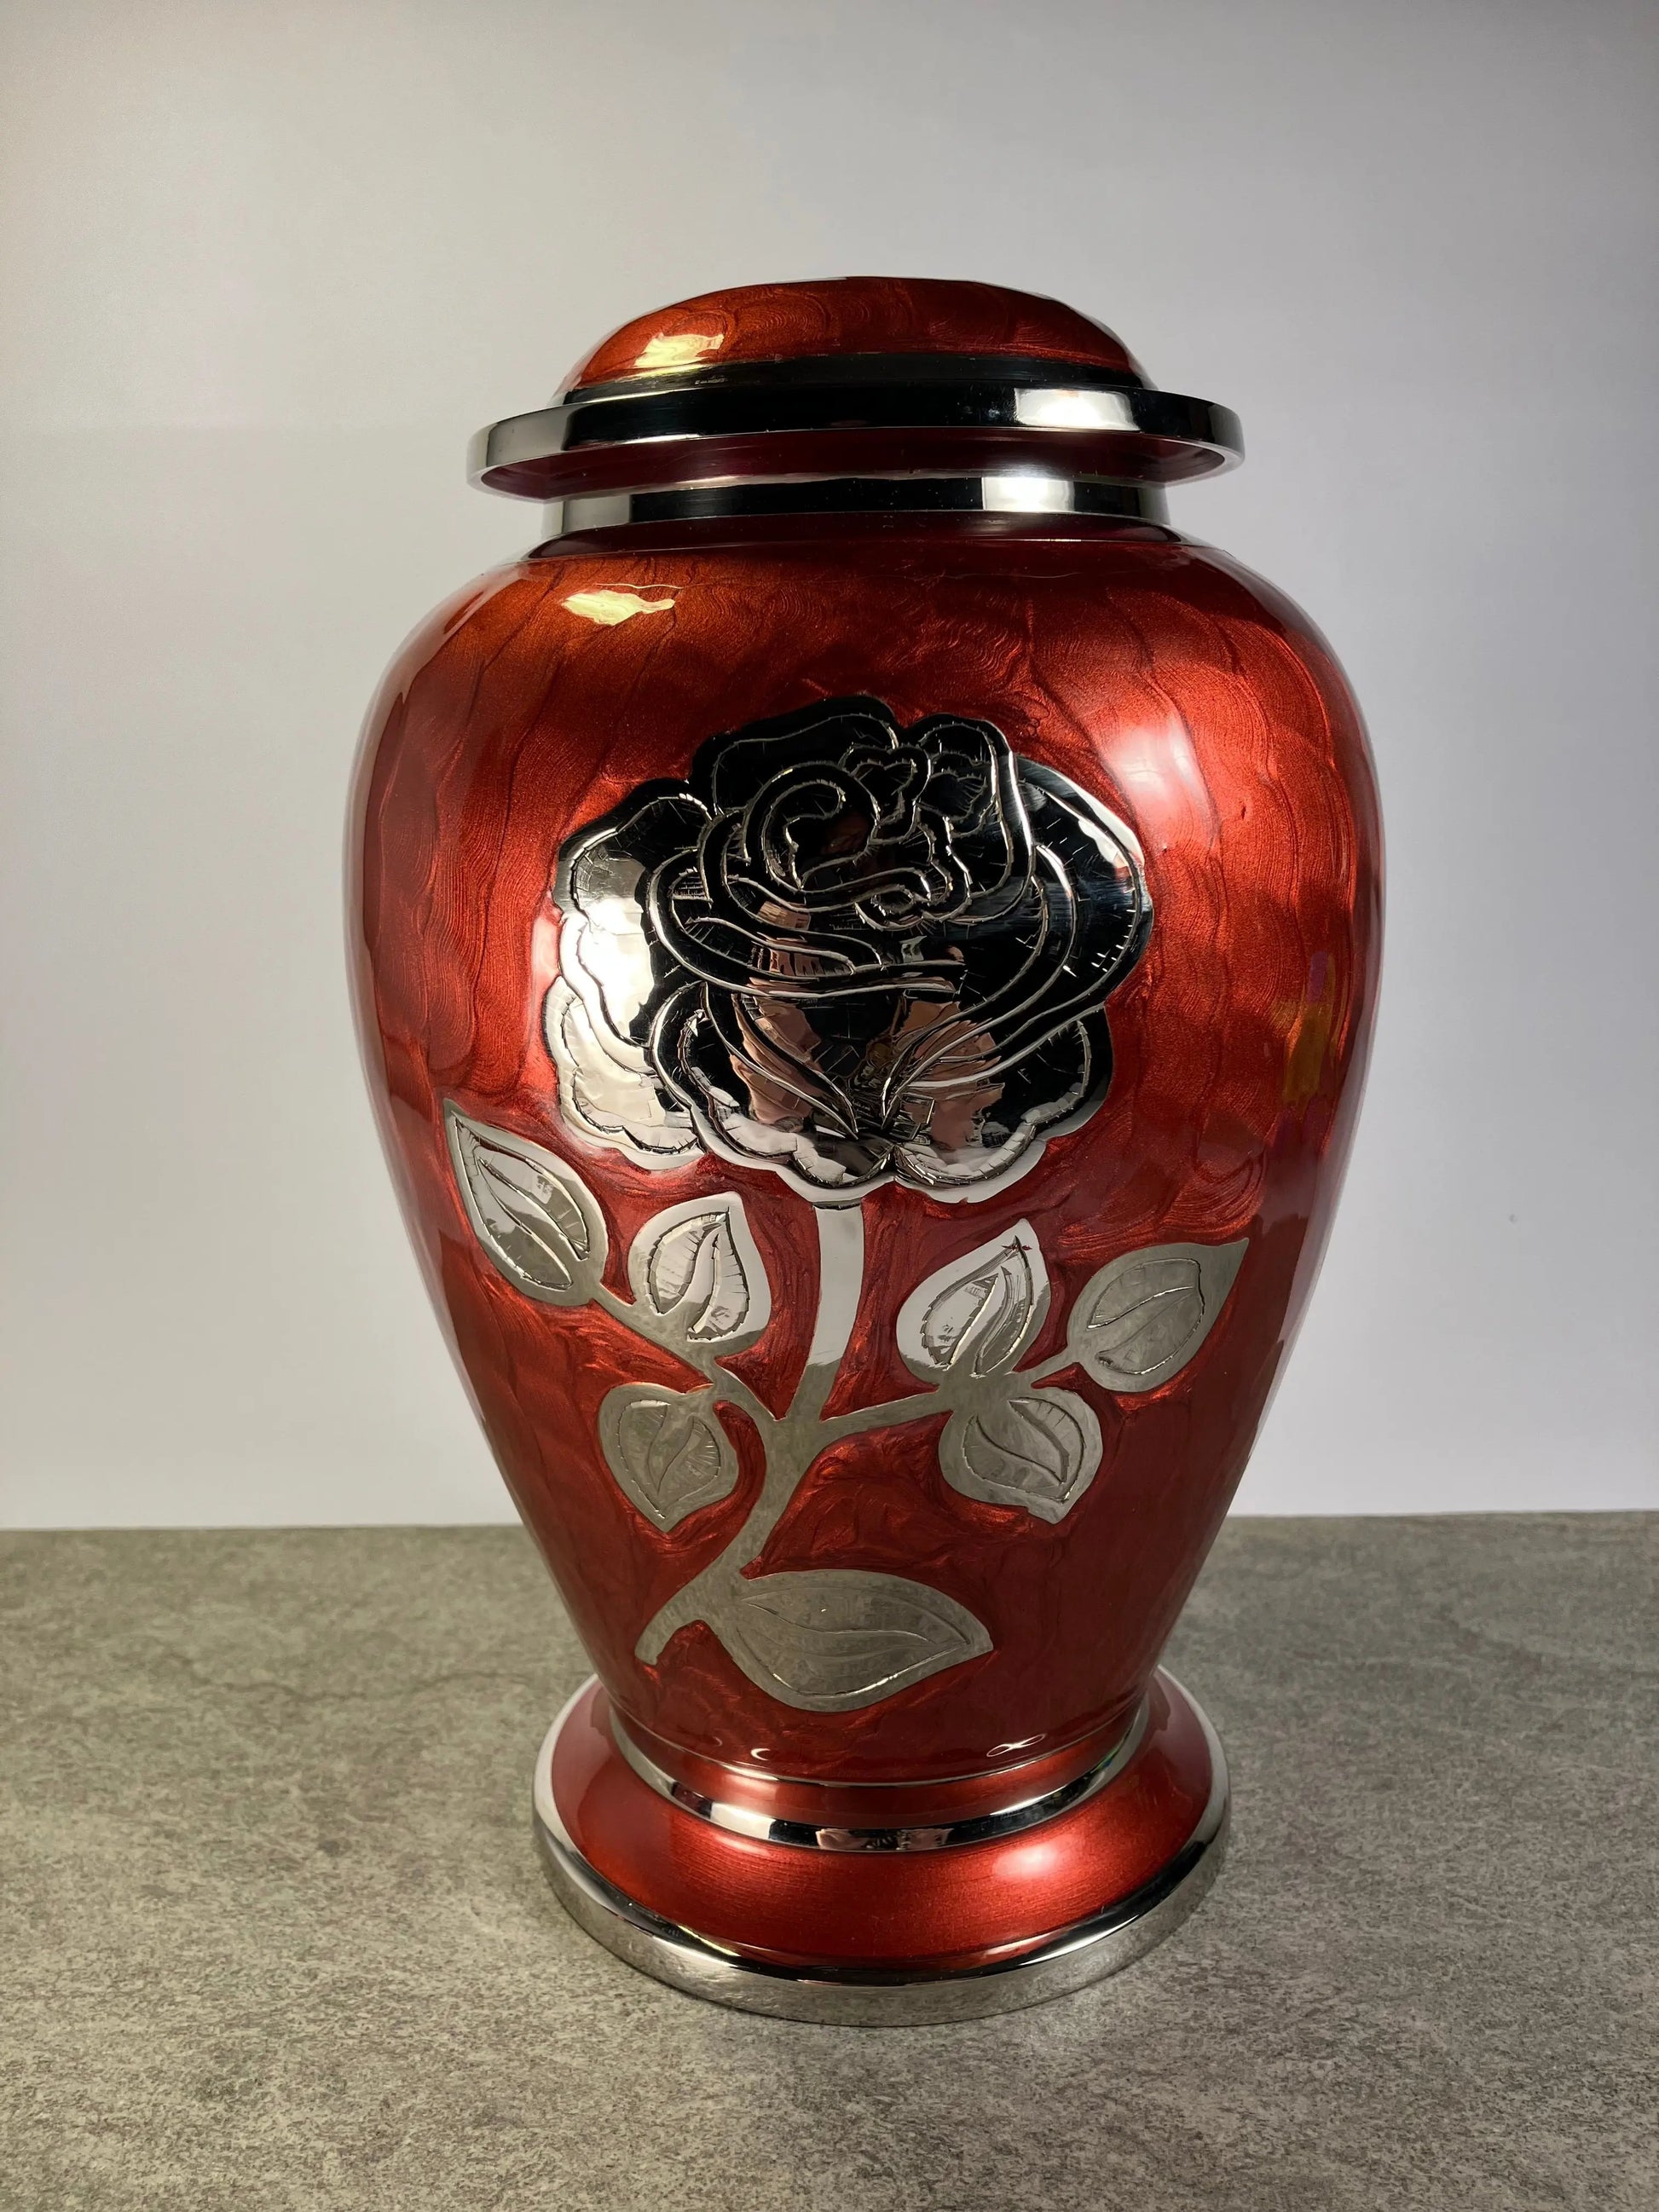 Sarang Adult Ashes Urn-Adult Urn for Ashes-Cremation Urns- The cremation urns for ashes and keepsakes for ashes come in a variety of styles to suit most tastes, decor and different volumes of funeral ashes.